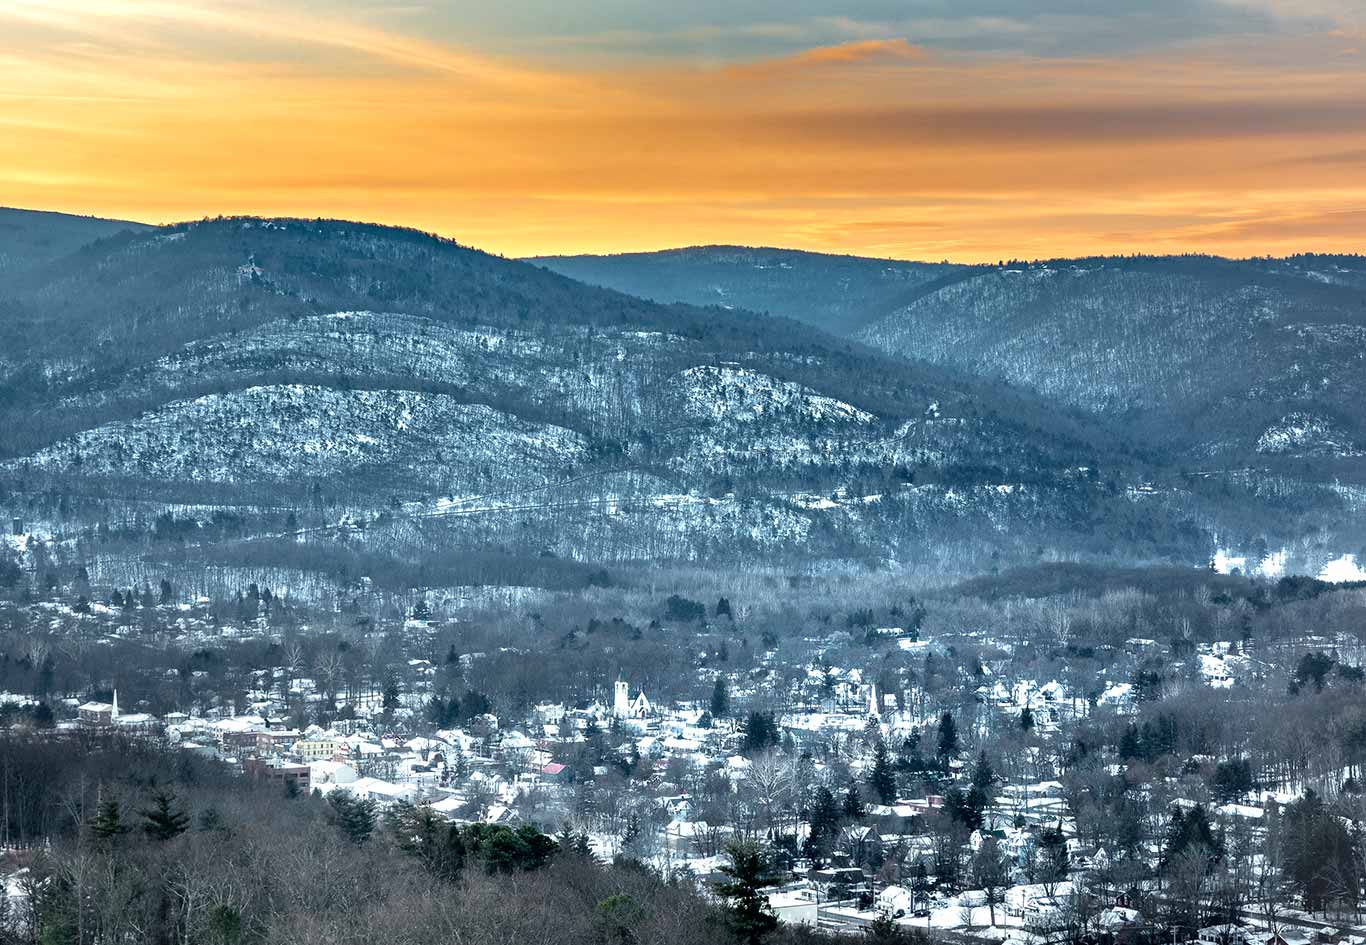 Snow-capped mountains in Ulster County, NY